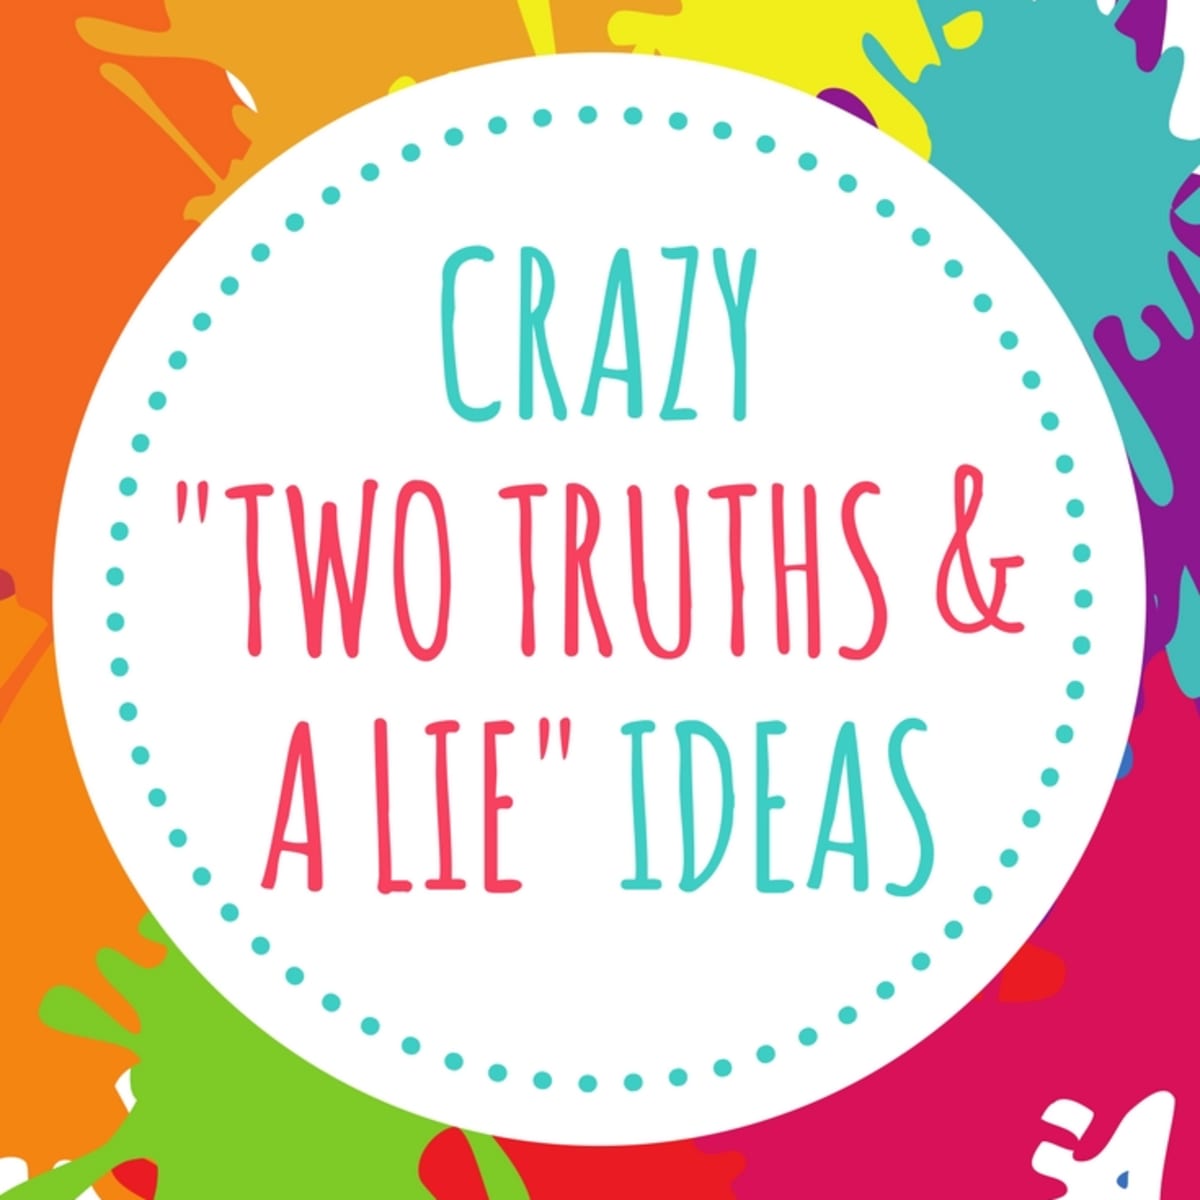 100+ Crazy Two Truths and a Lie Game Ideas - HobbyLark